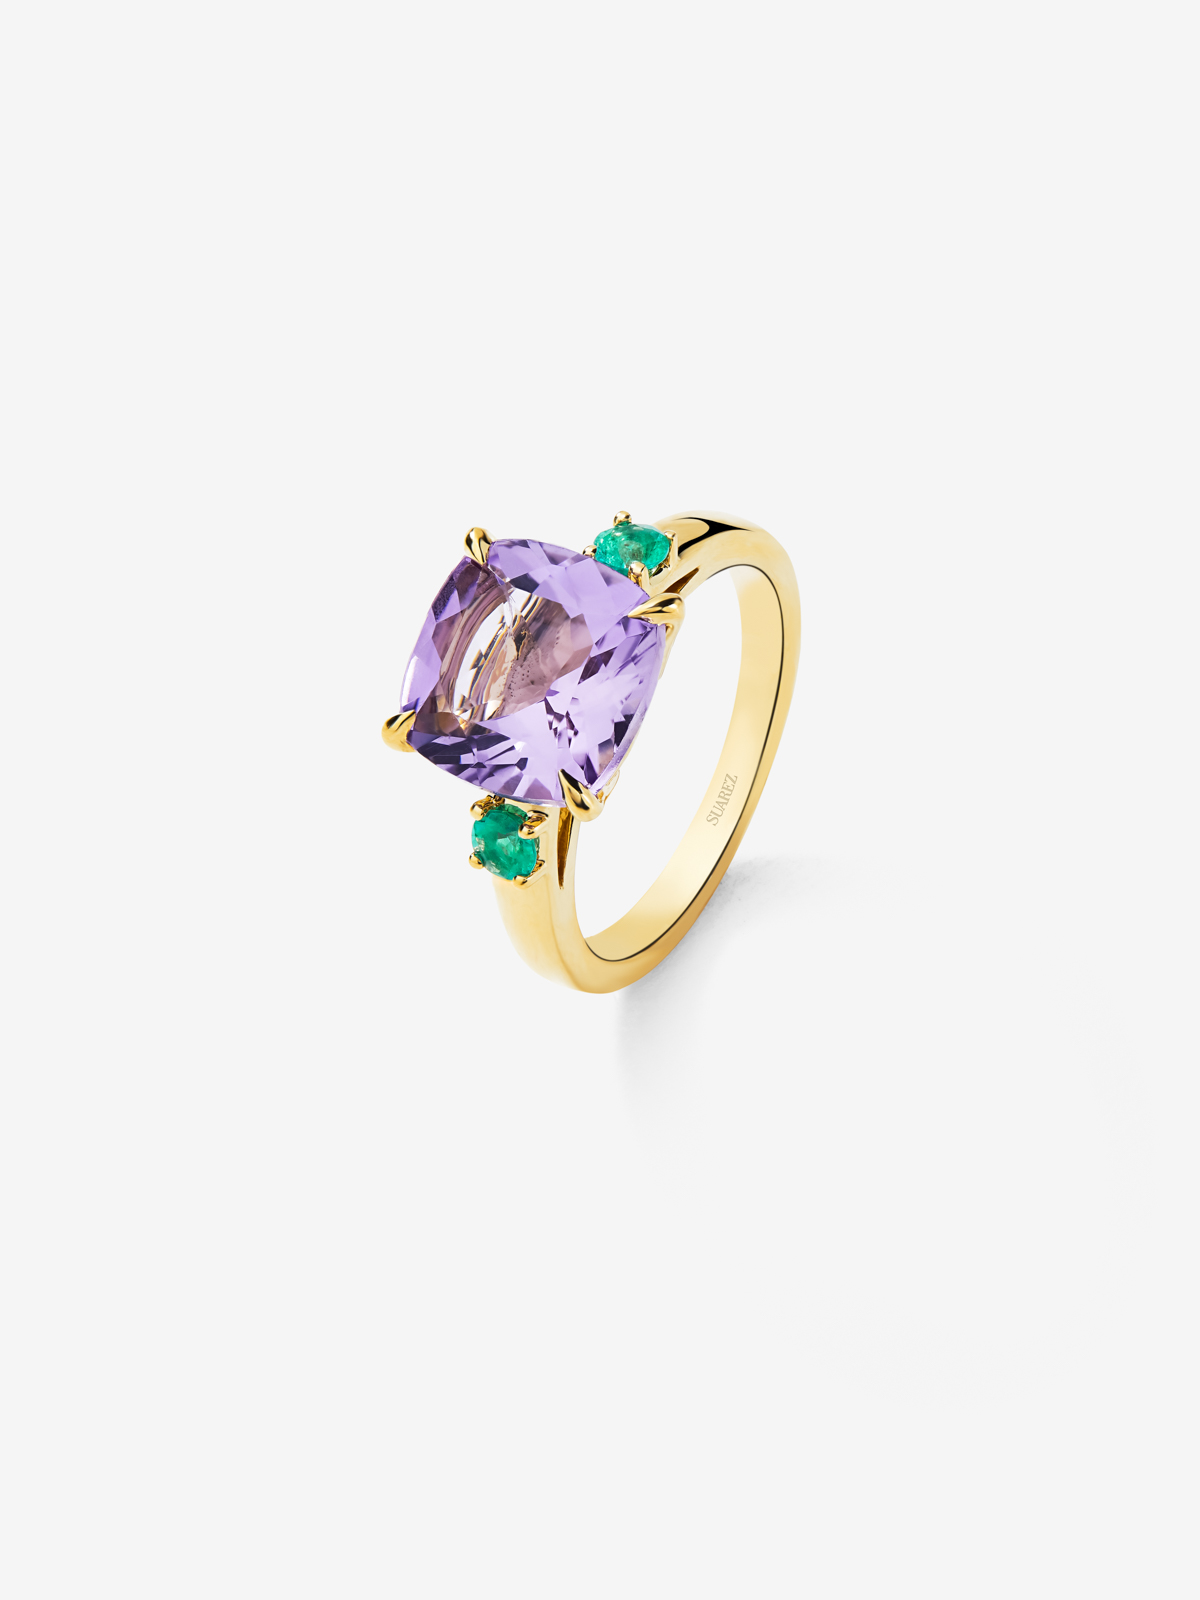 18K yellow gold ring with purple amethyst in 3.53 CTS and emeralds in bright 0.19 CTS